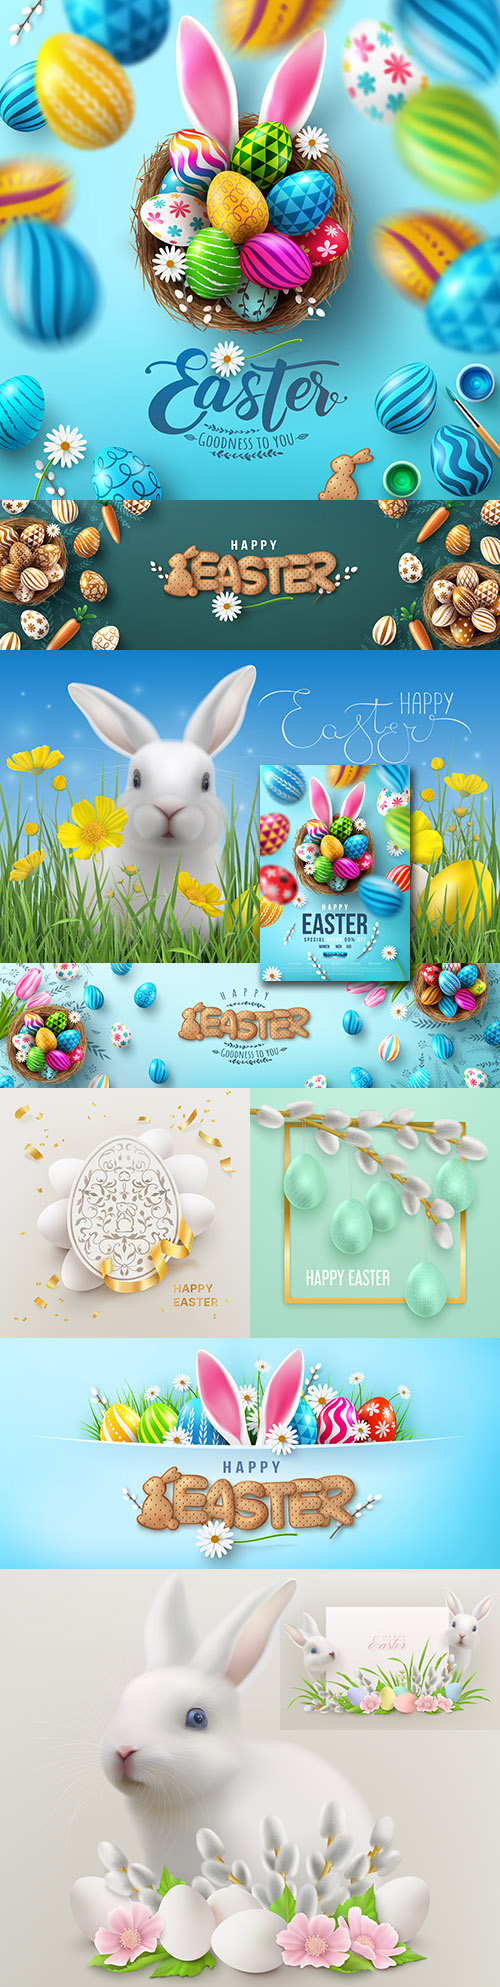 Happy Easter background and design banner with colorful eggs 7